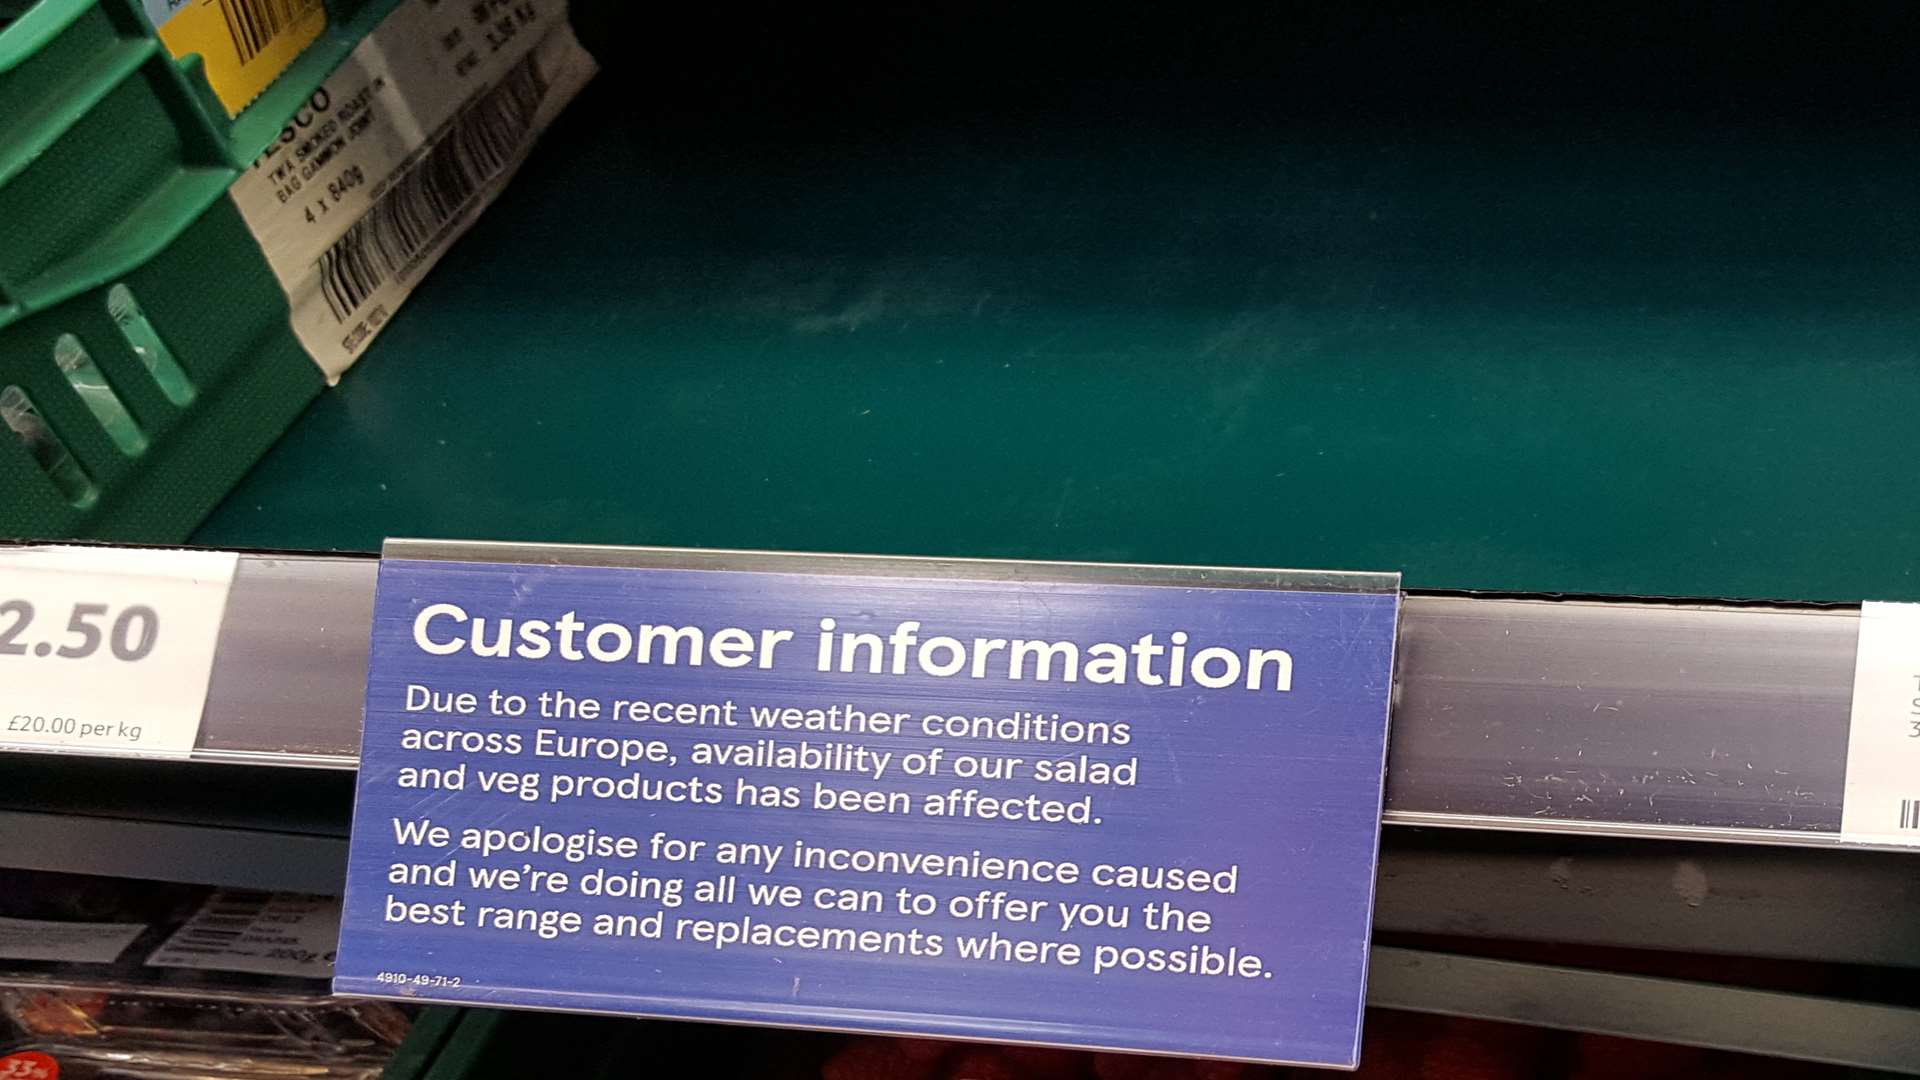 A sign in Tesco Express in Week Street, Maidstone, gives an explanation for the empty shelves